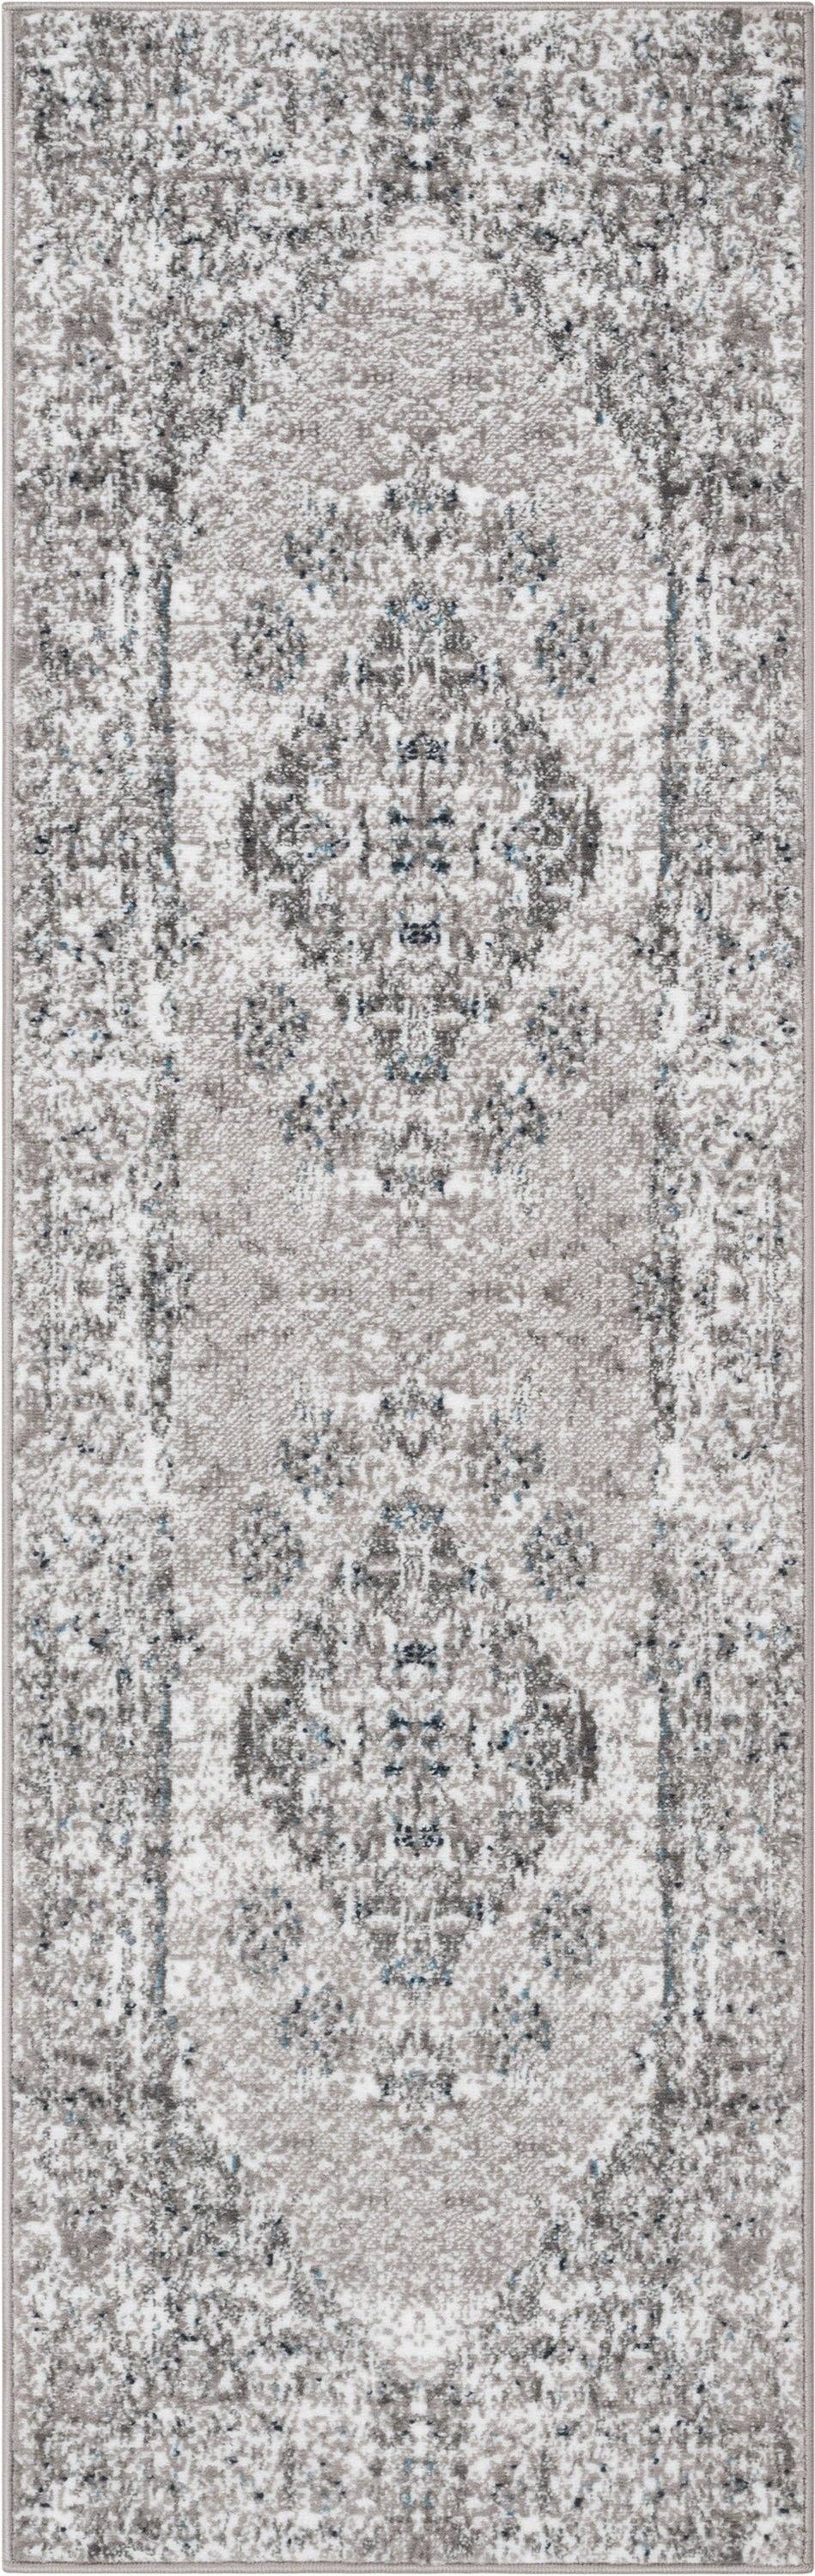 Well Woven - Trieste Vintage Floral Medallion Pattern Ivory Grey Rug - 5'3" x 7'3"